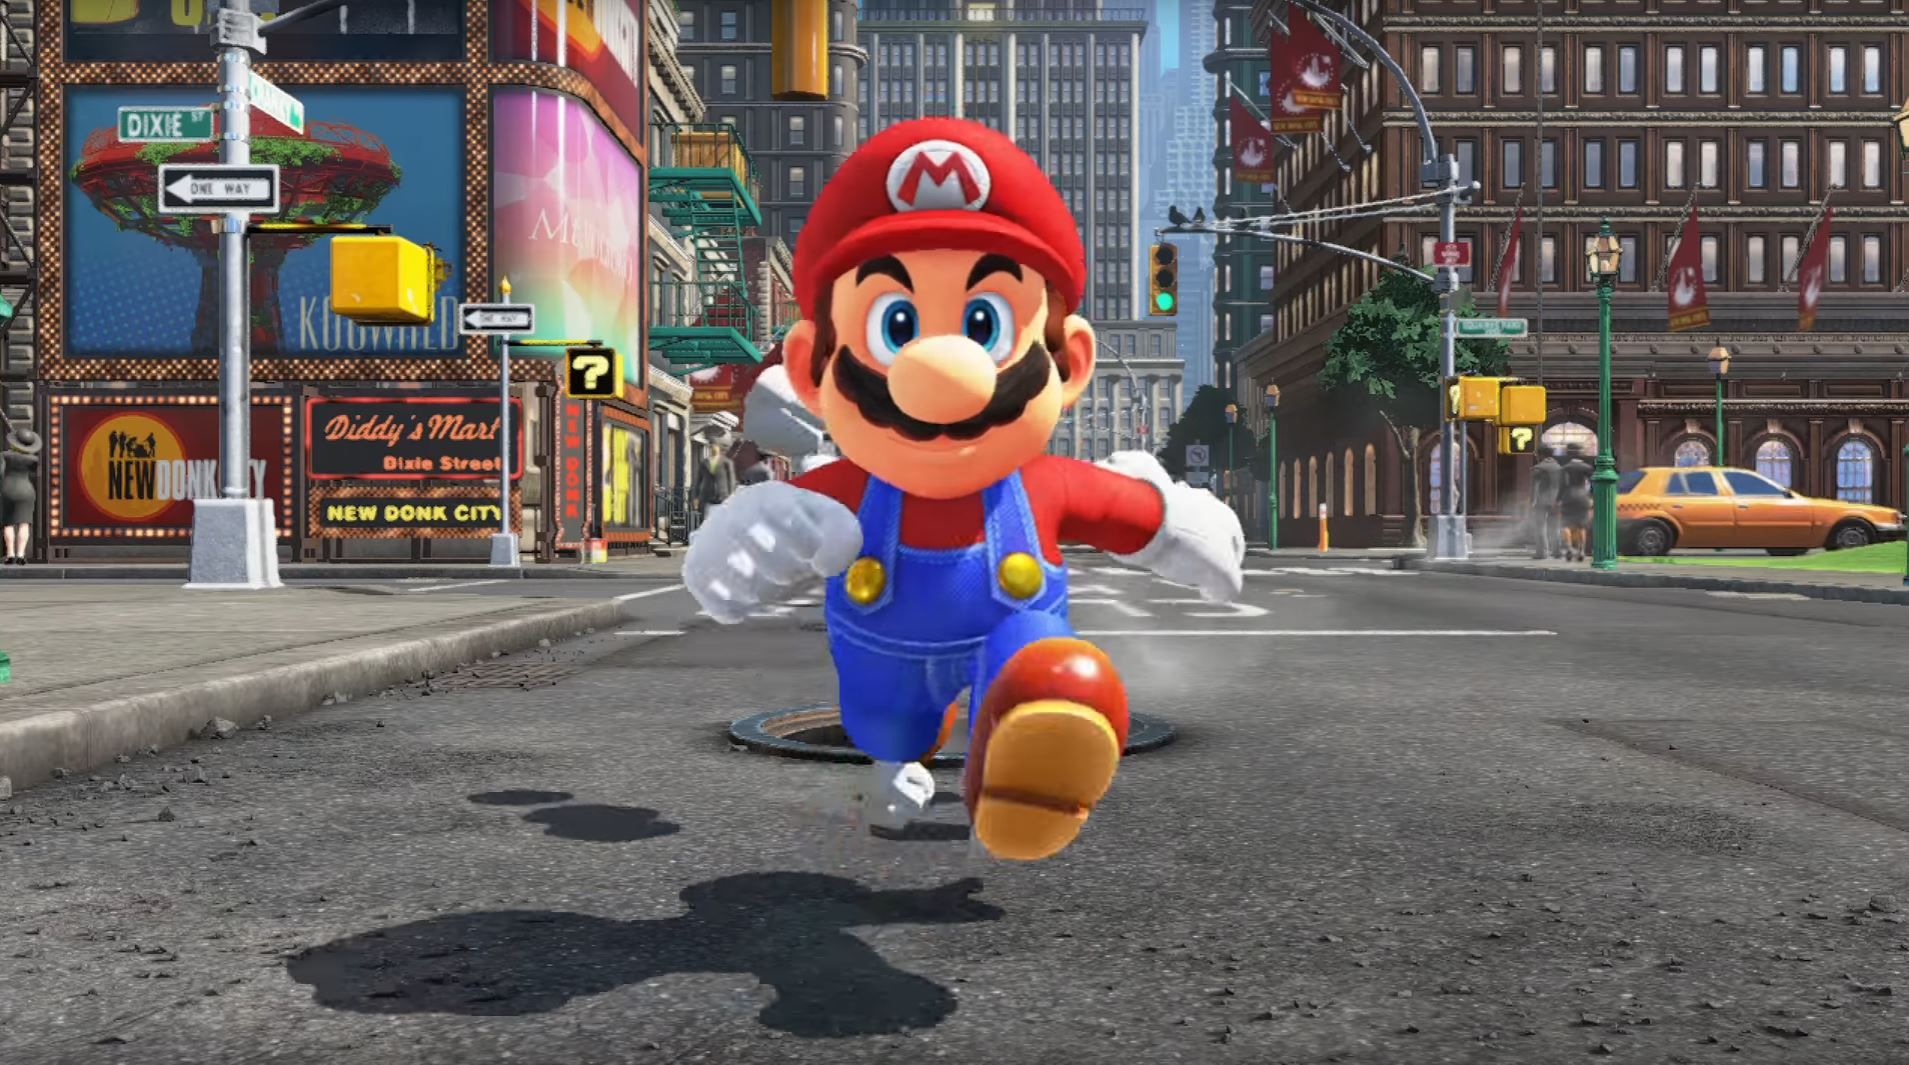 What Is Super Mario Odyssey?